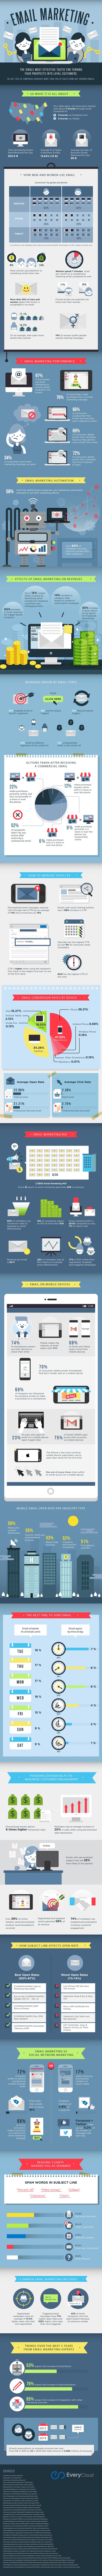 email marketing statistics guide